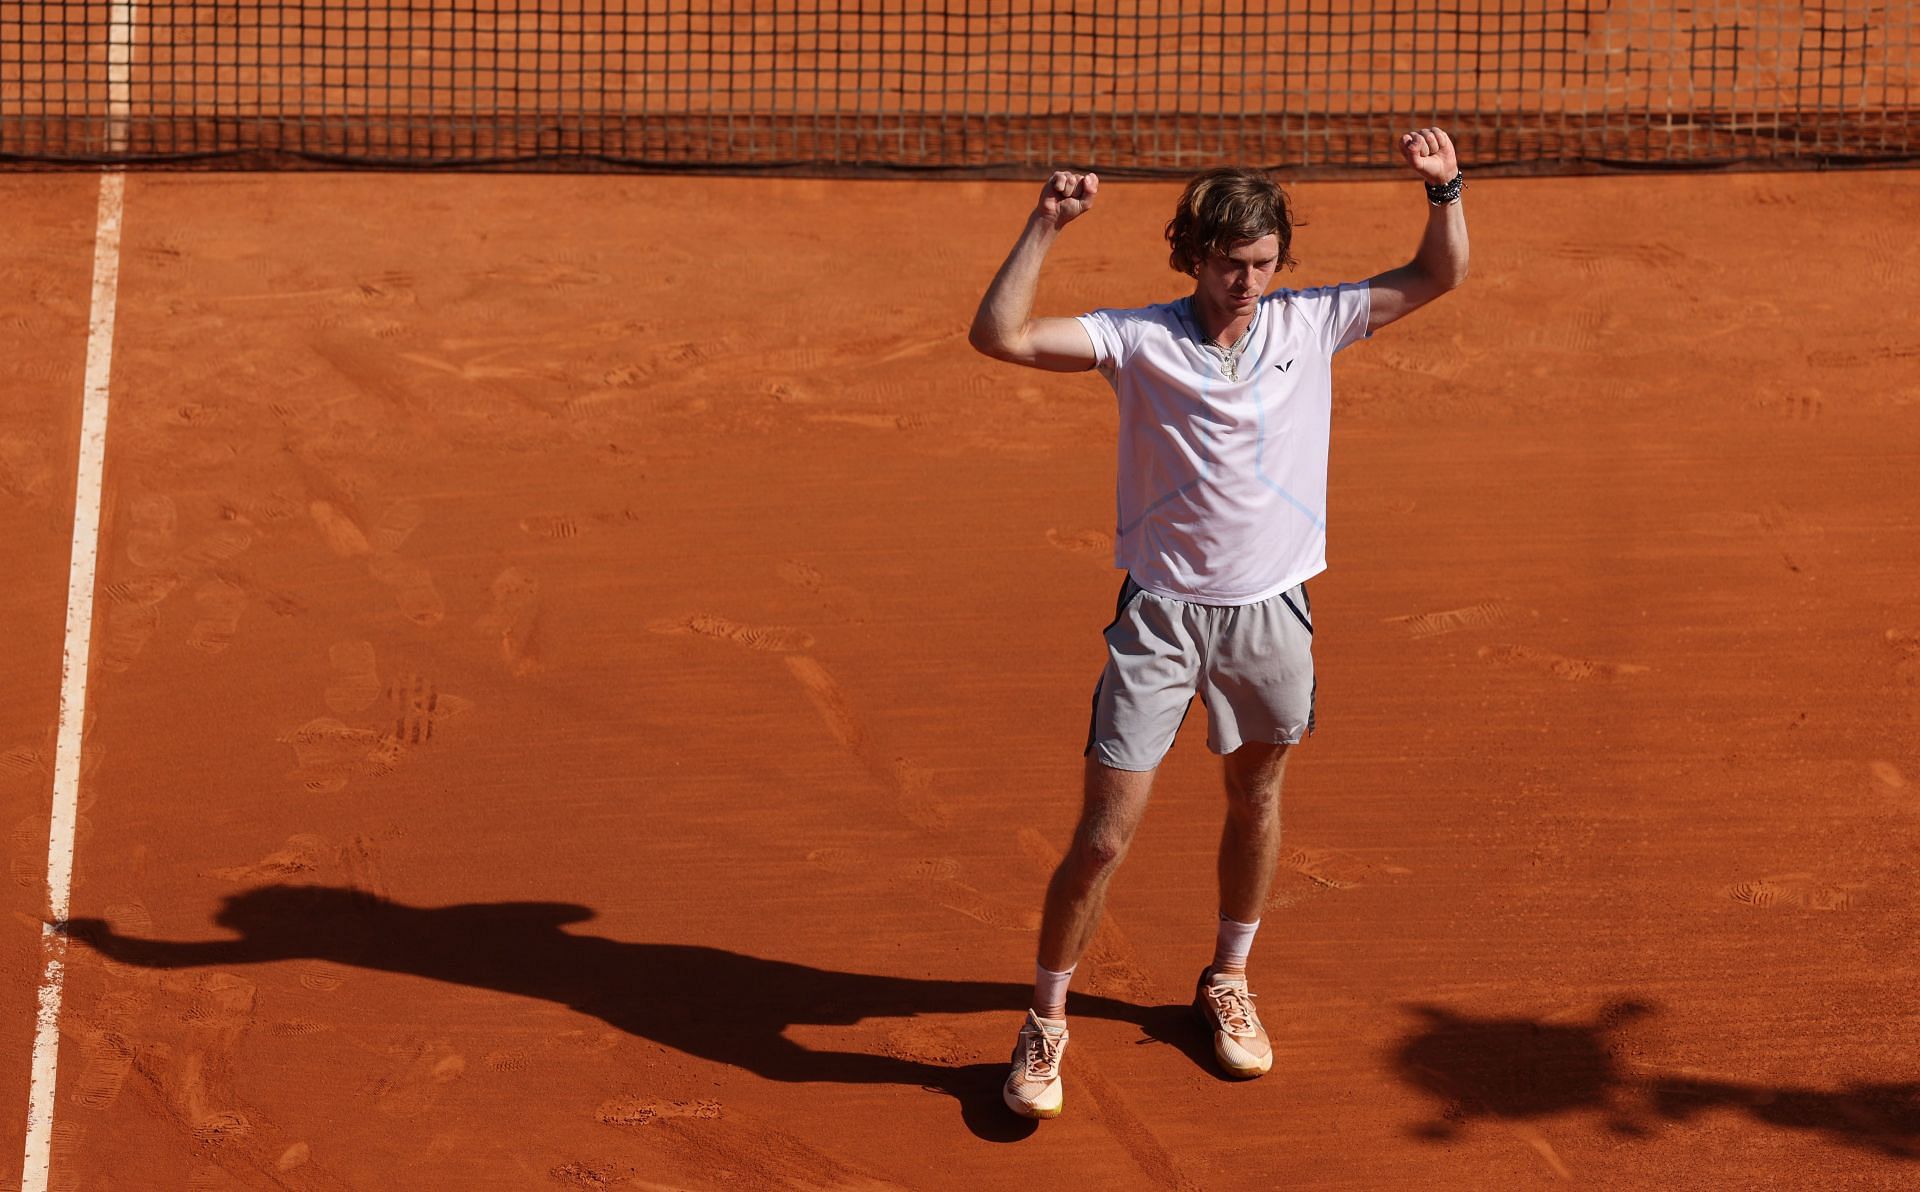 Andrey Rublev at the Rolex Monte-Carlo Masters - Day Three